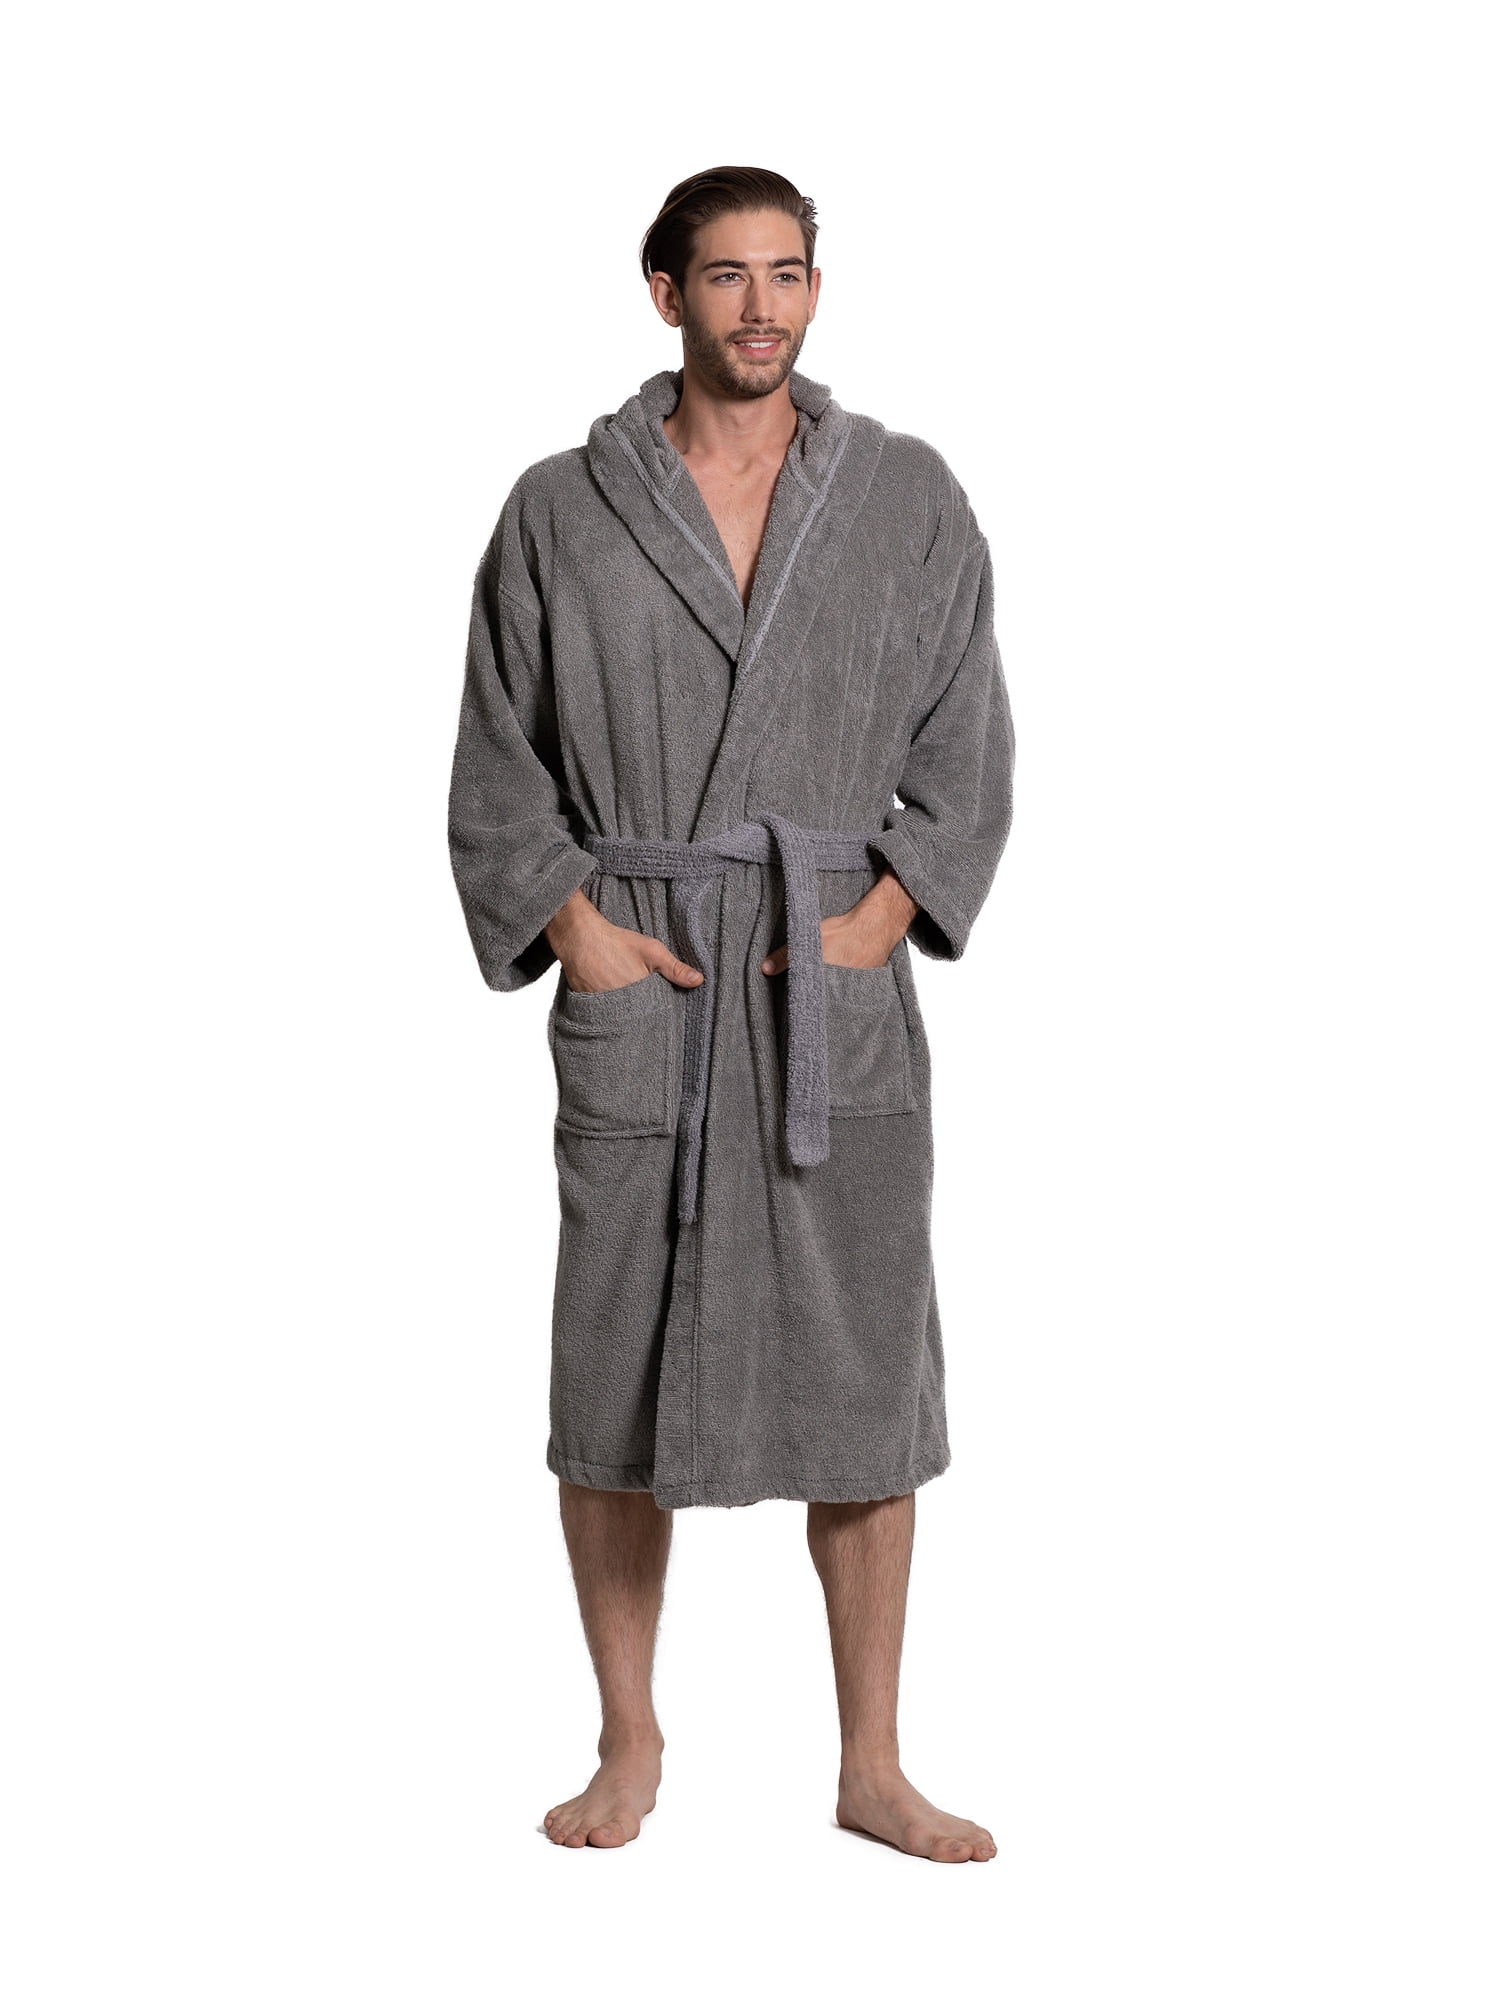 Unisex 100% Cotton Terry Toweling Hooded Bath Robe Dressing Gown Soft & Cozy 